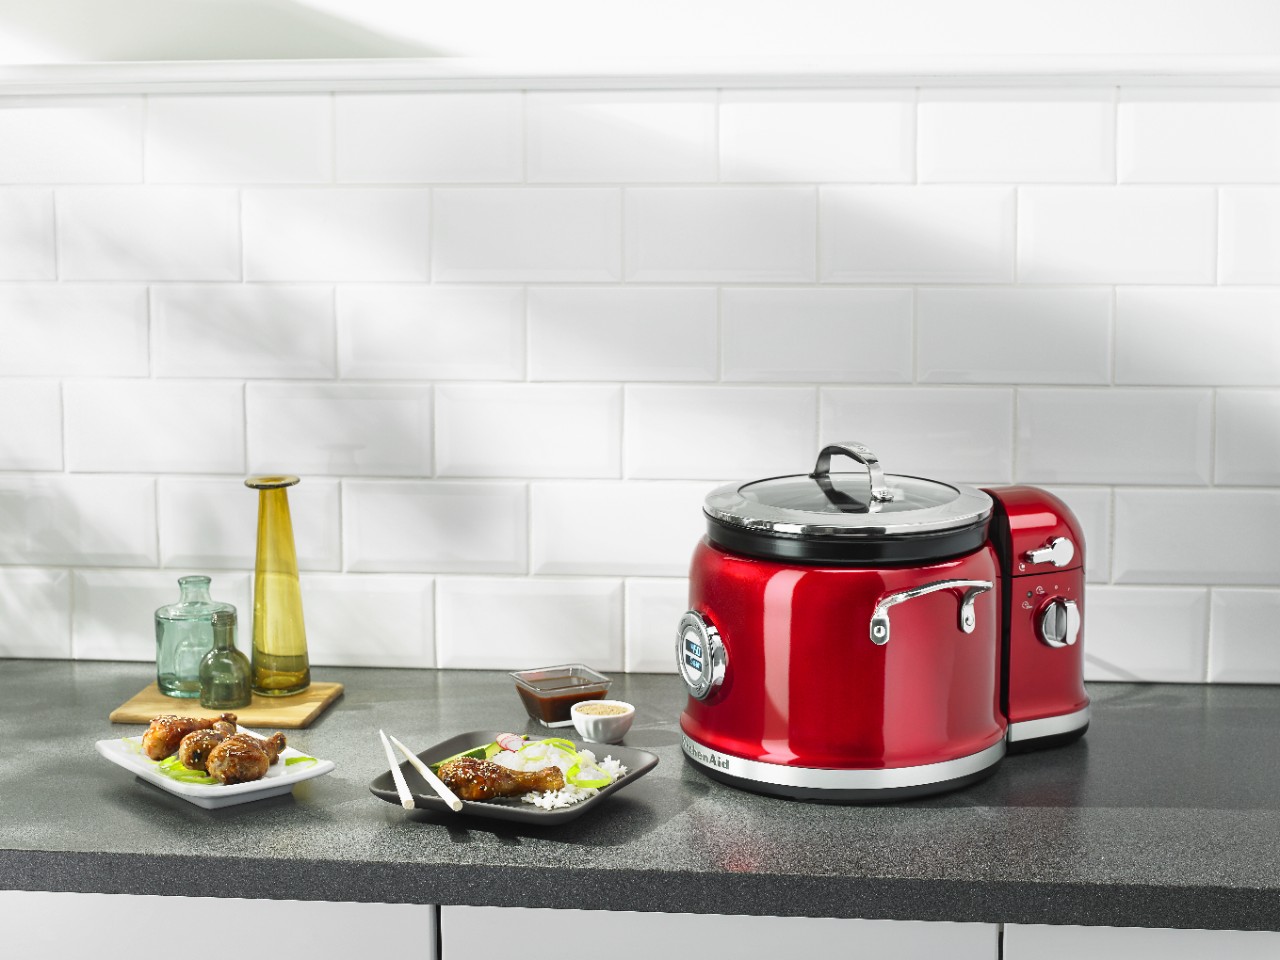 Make your favorite foods with the KitchenAid® multi-cooker.